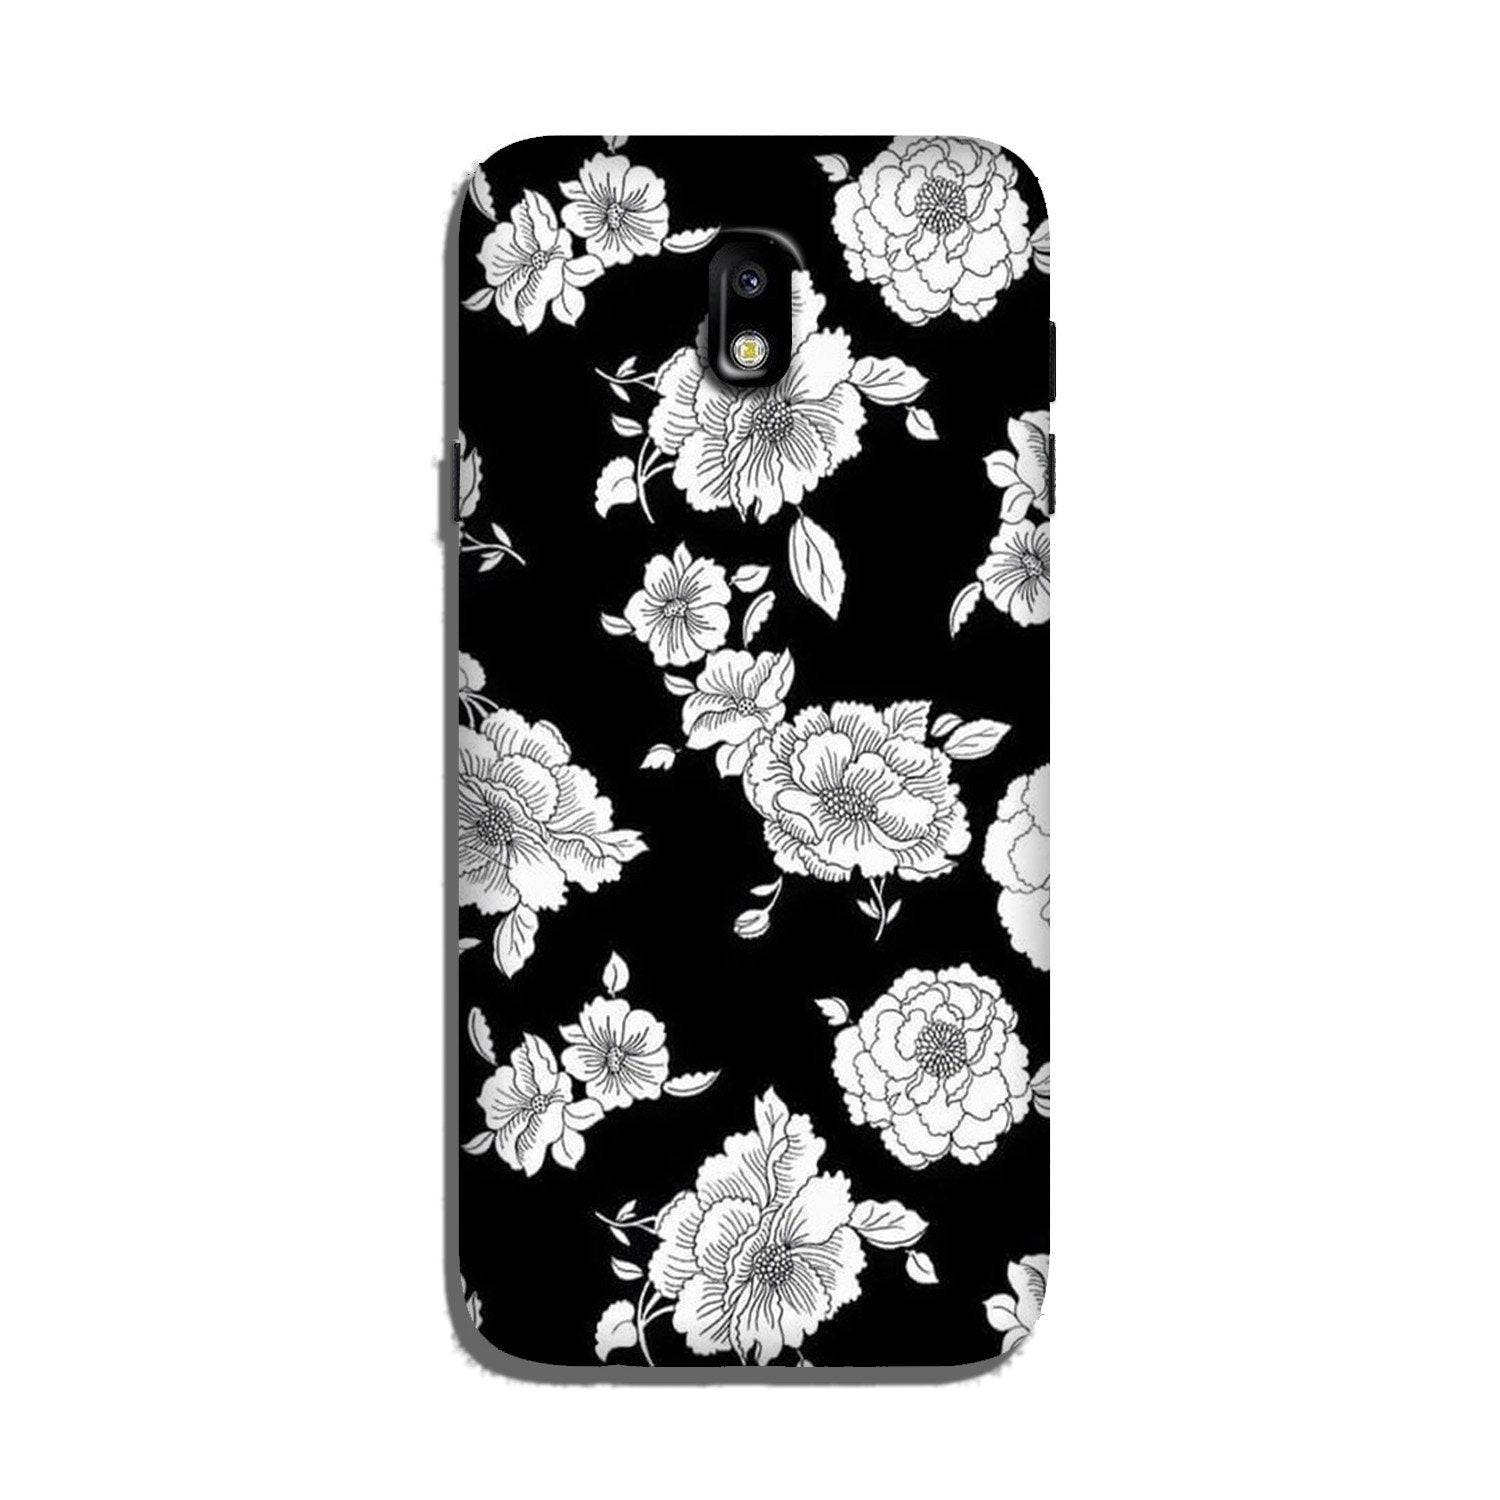 White flowers Black Background Case for Galaxy J3 Pro